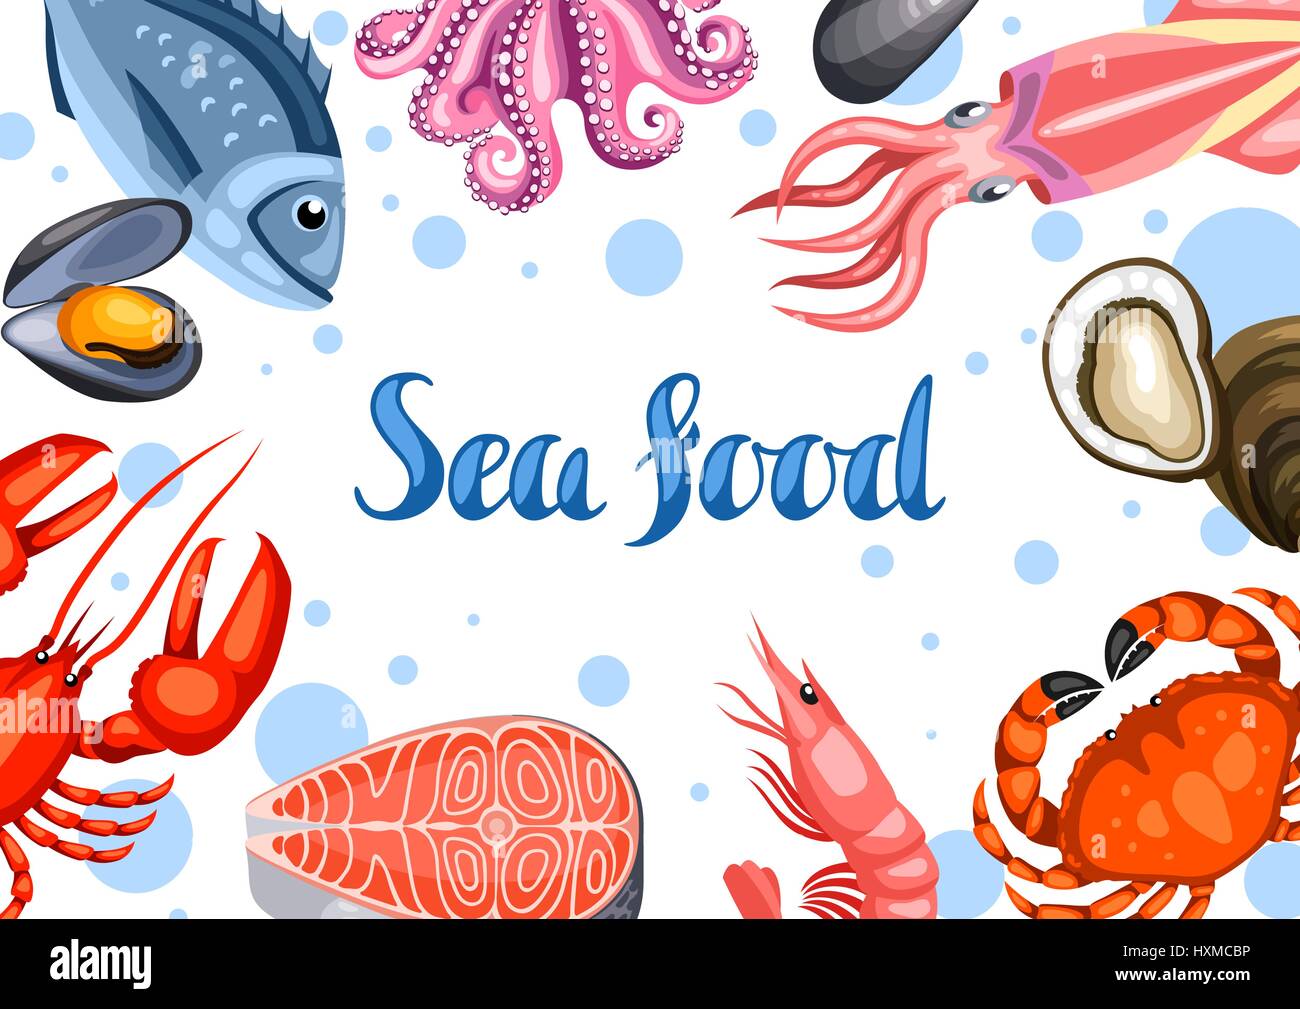 Background with various seafood. Illustration of fish, shellfish and crustaceans Stock Vector